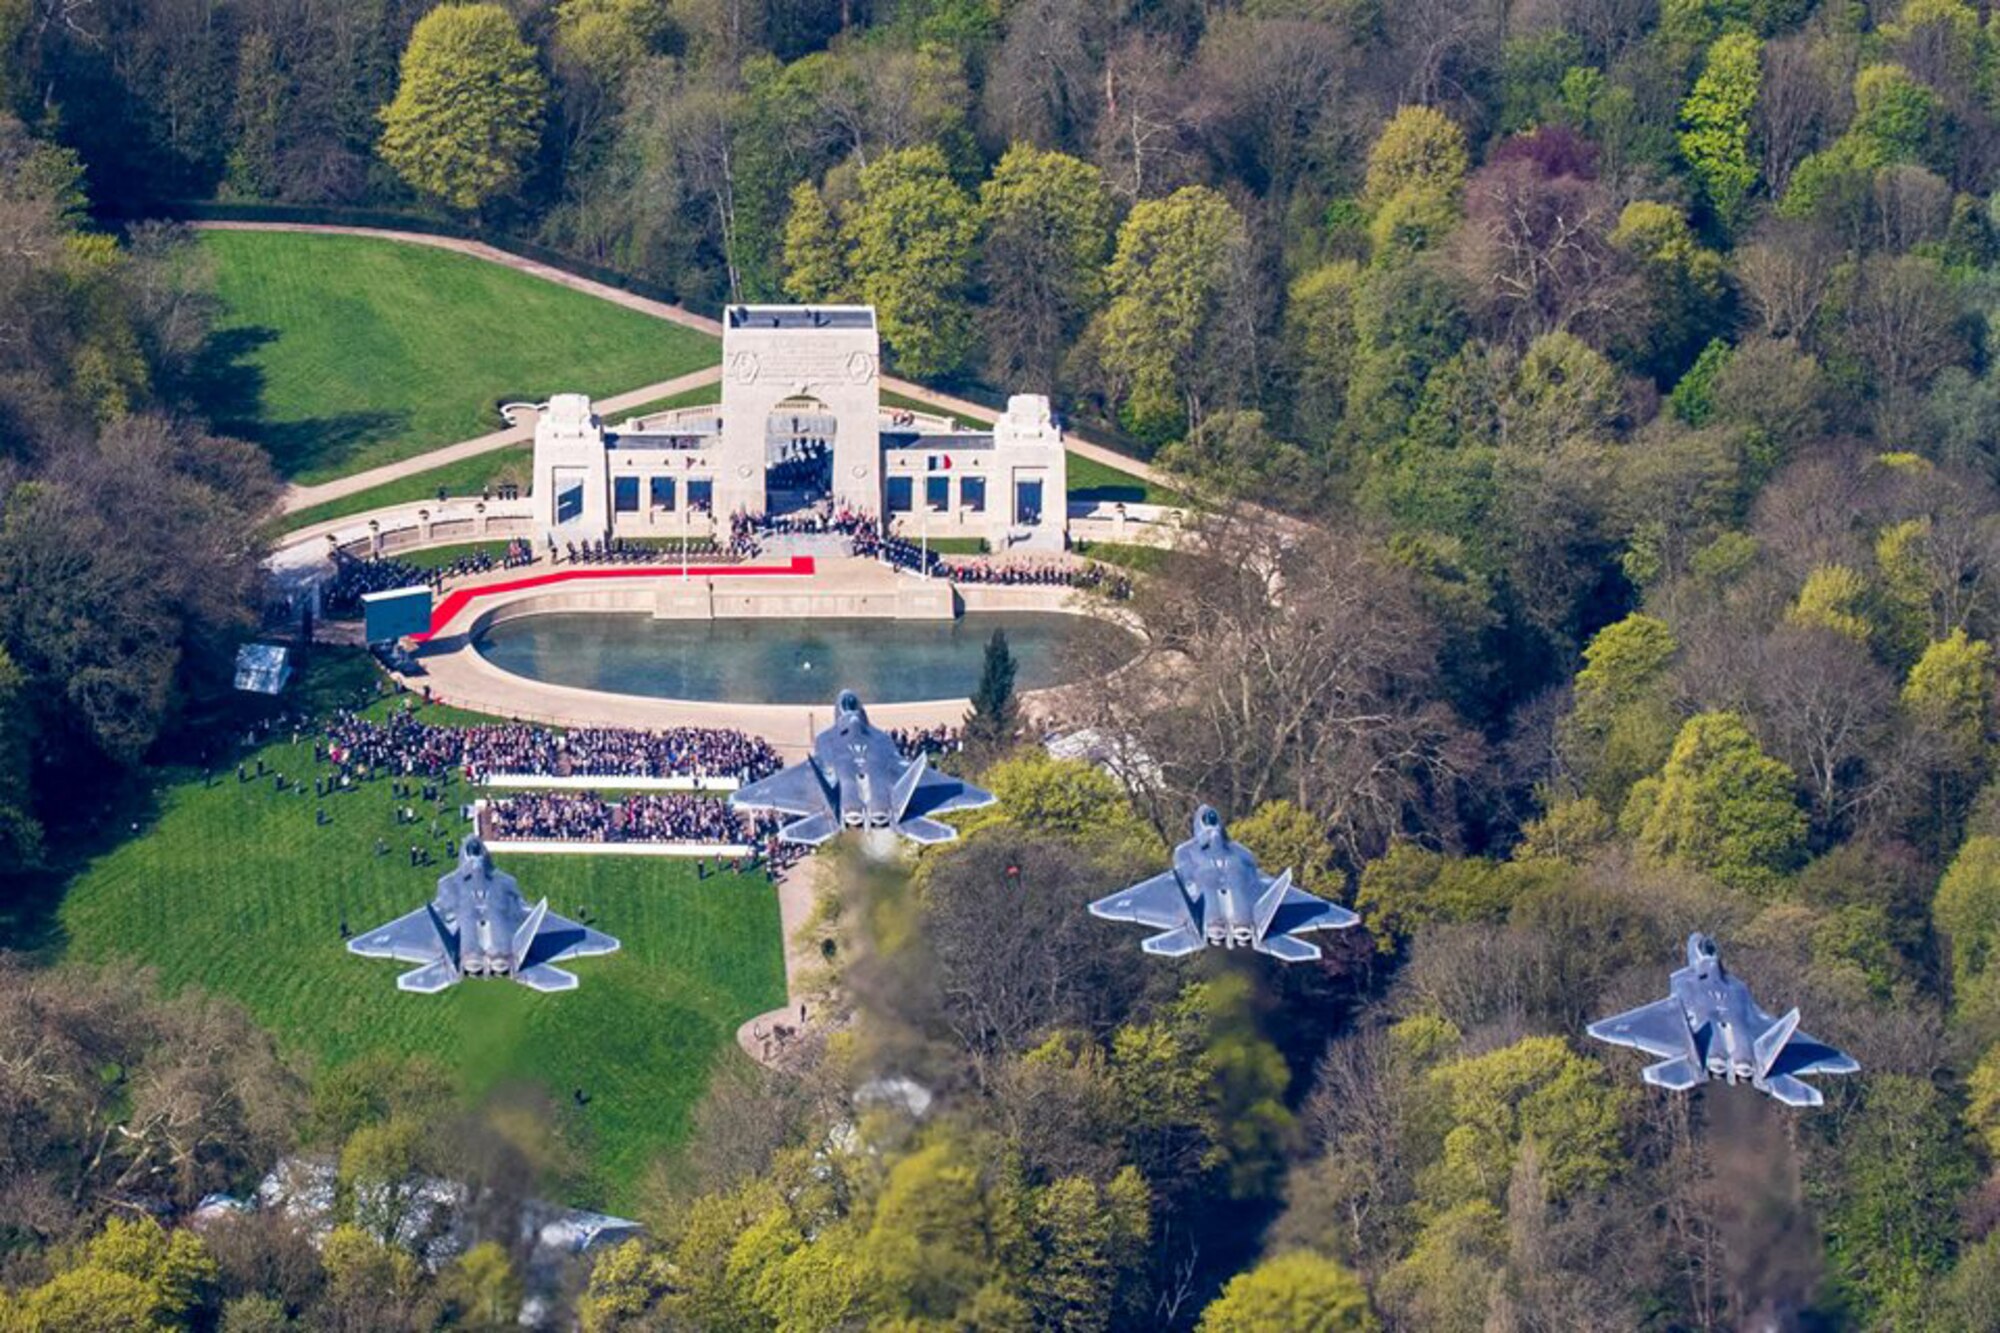 Pilots from the 95th and 301st Fighter Squadrons from Tyndall Air Force Base, Fla., fly over the Lafayette Escadrille Memorial, France, for a ceremony April 20. The ceremony celebrated the centennial of the Layfayette Escadrille, which was comprised of American volunteer pilots who flew with the French military before and after the United States entered World War I. The monument honors the service of these pilots and serves as the final resting place for some. The 301 FS is a unit under the 44th Fighter Group, which is a classic associate unit at Tyndall. (Courtesy photo)  